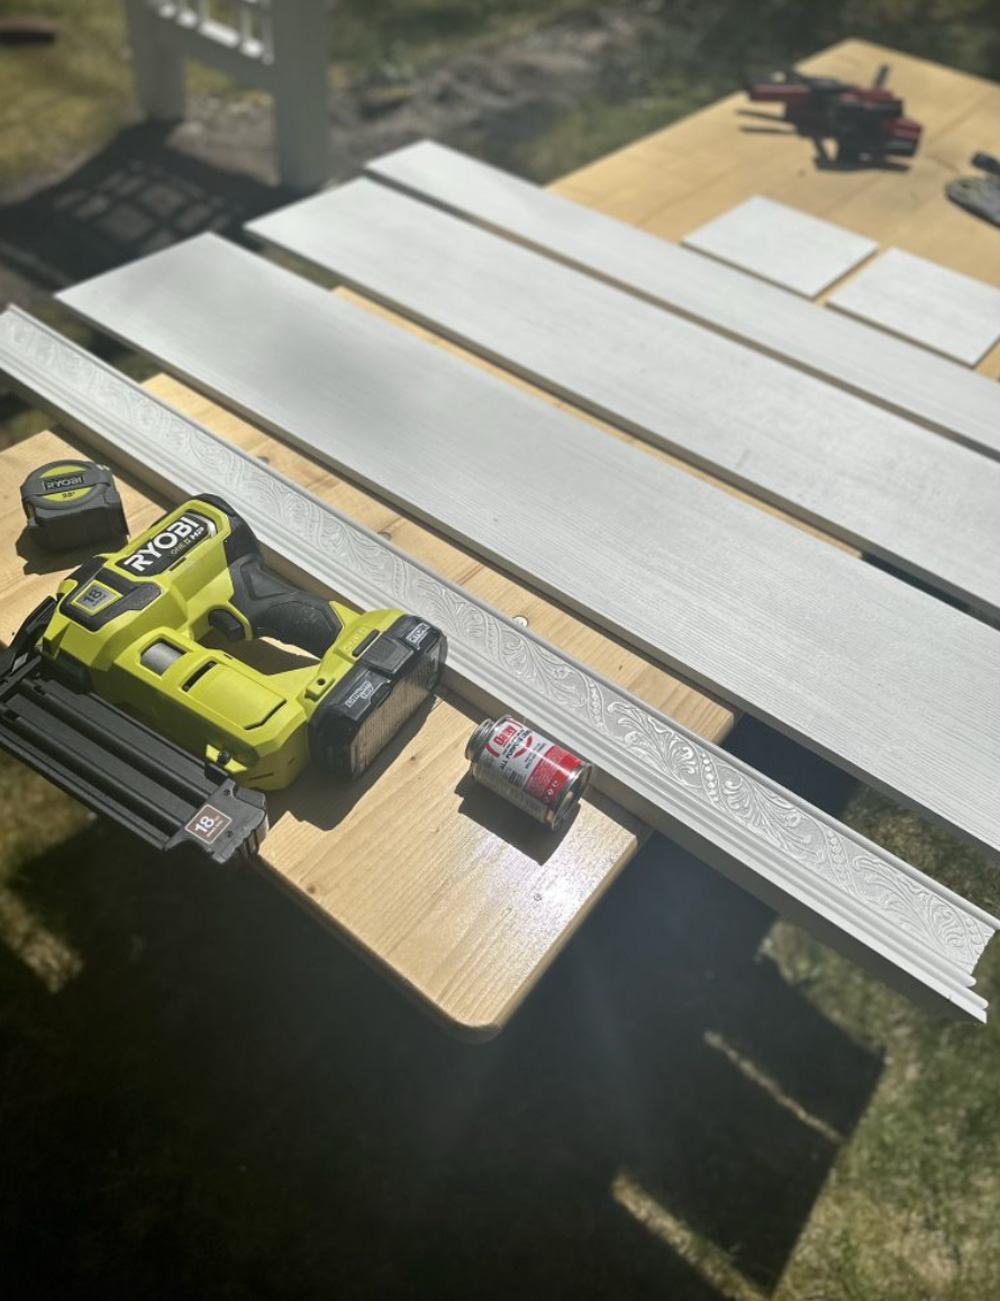 Sheets of PVC laid on wood table with Ryobi tools. 